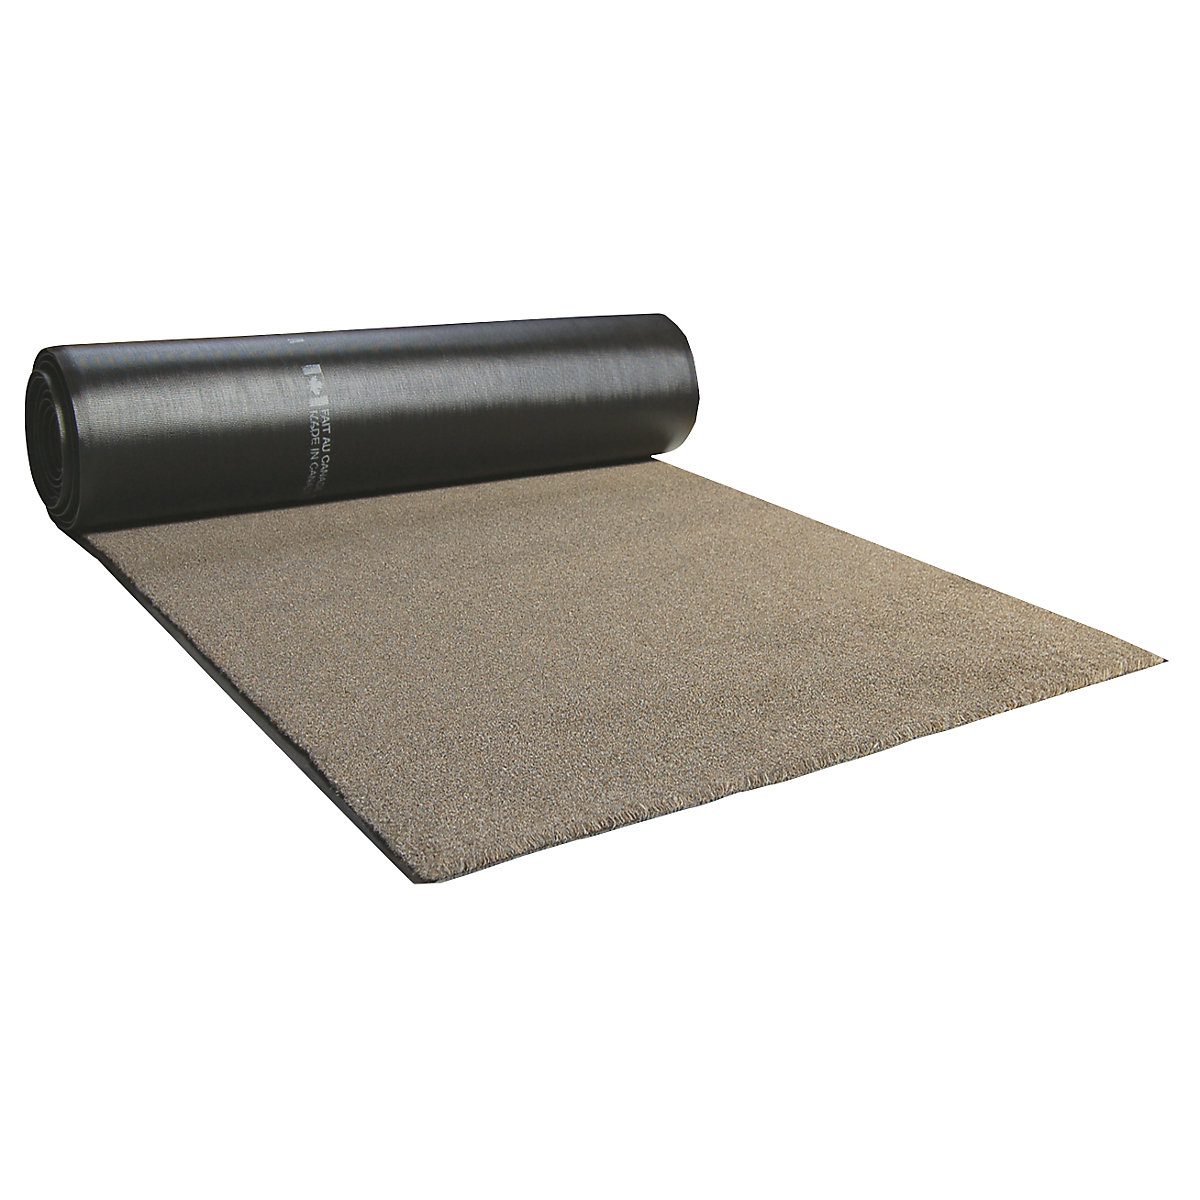 EAZYCARE AQUA entrance matting, width 900 mm, sold by the metre, brown